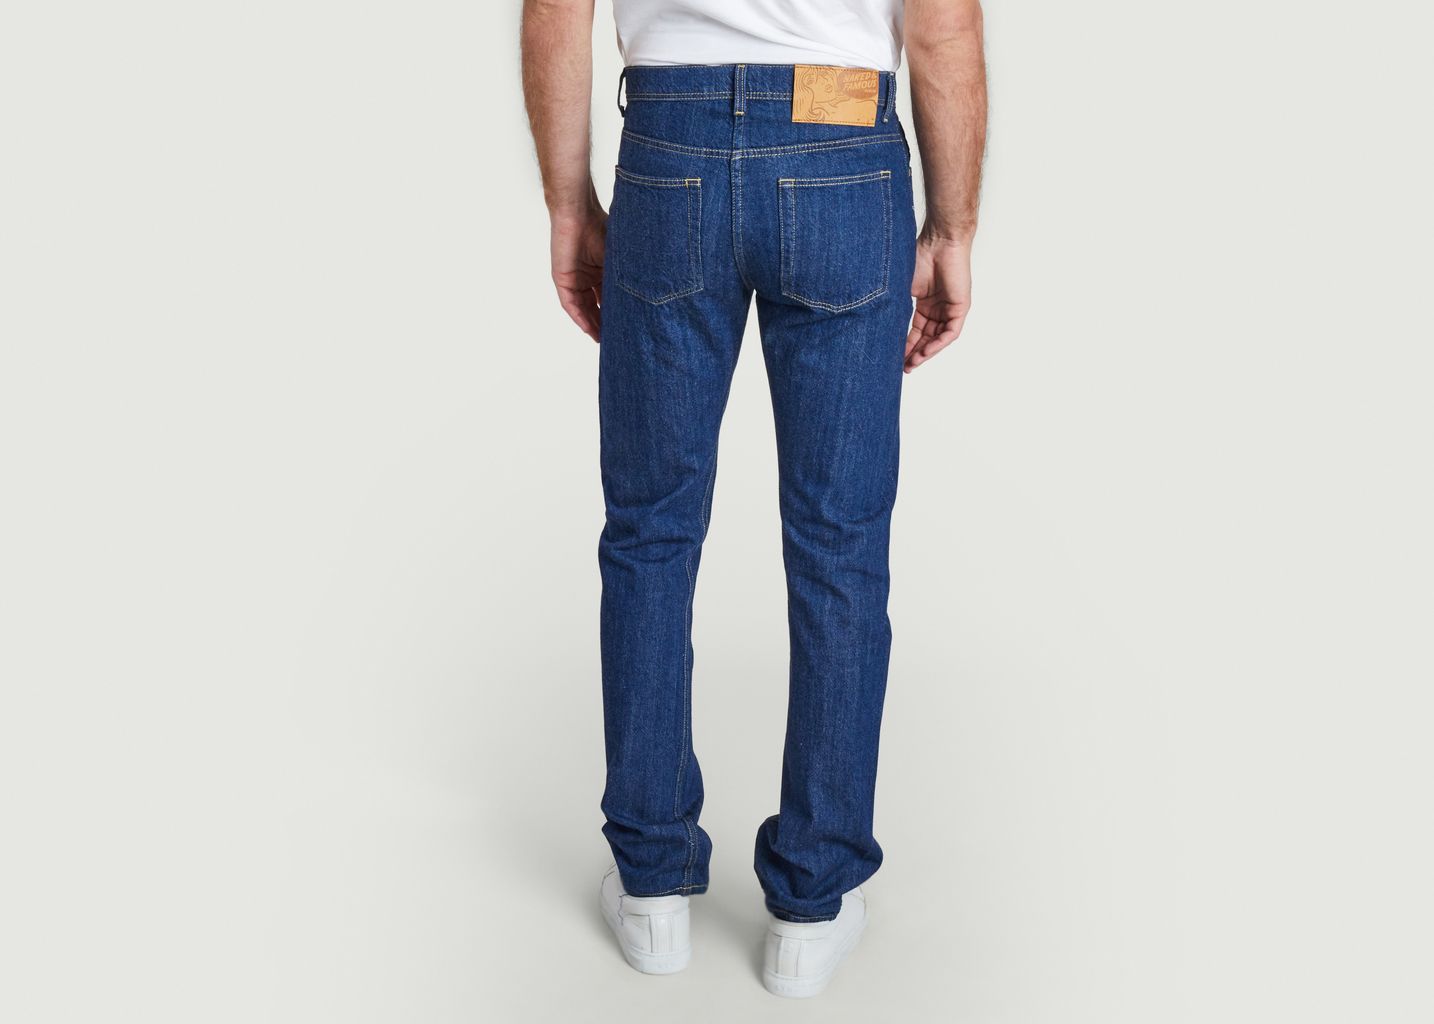 Jean New Frontier Selvedge Weird Guy - Naked and Famous